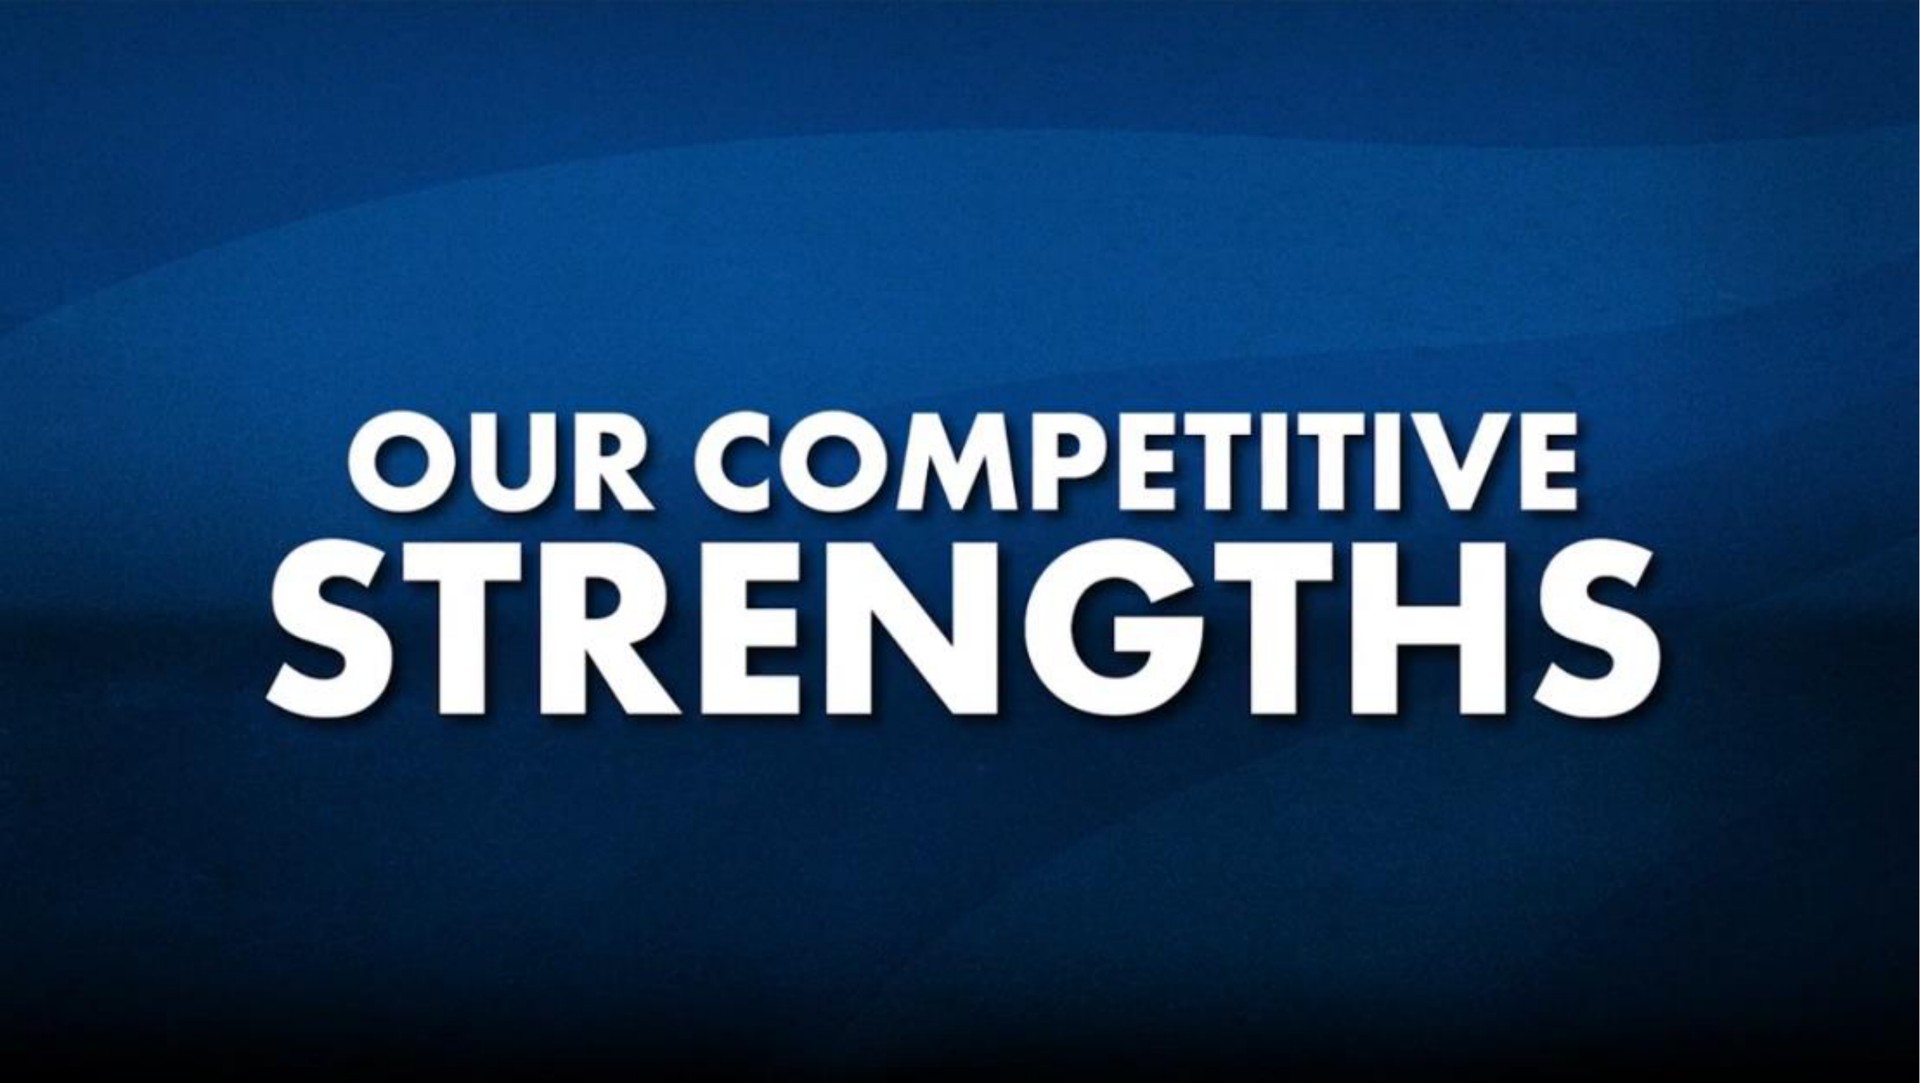 our competitive strengths | Dutch Bros